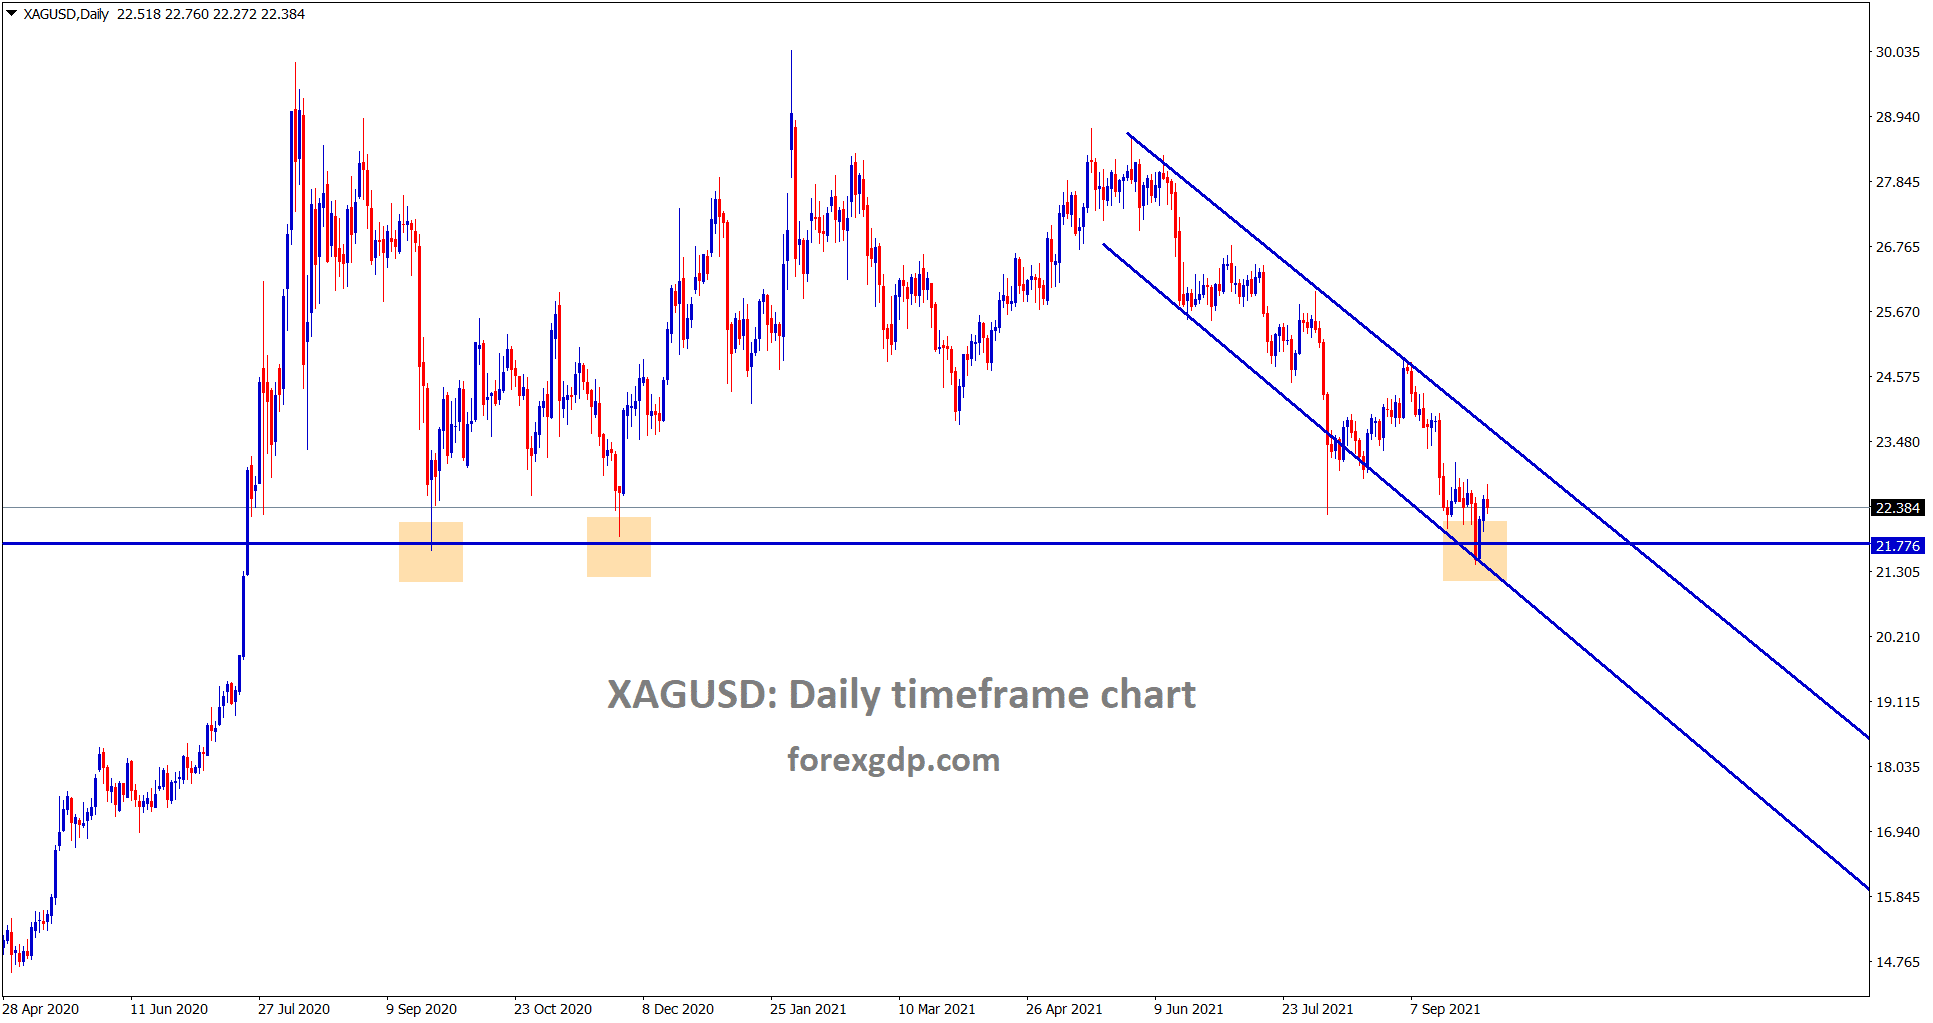 Silver XAGUSD is rebounding from the suppport and lower low level of a descending channel